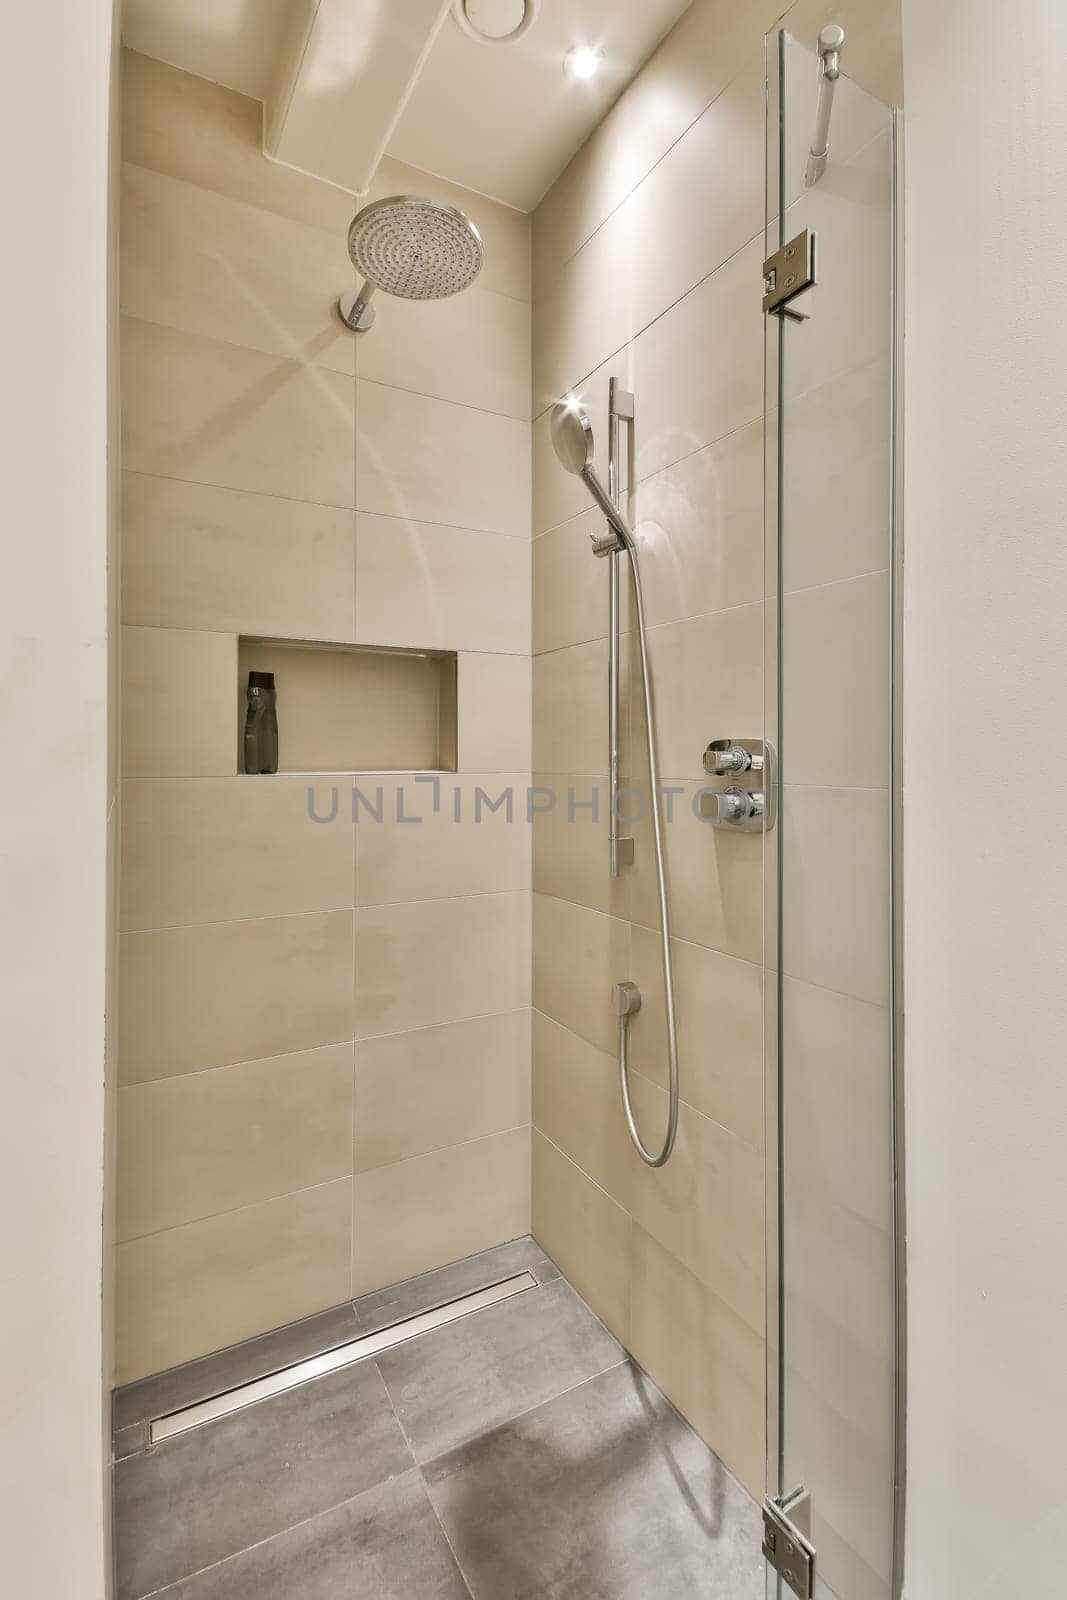 a walk in shower that is very clean and ready to use for your bathroom reurrecturing